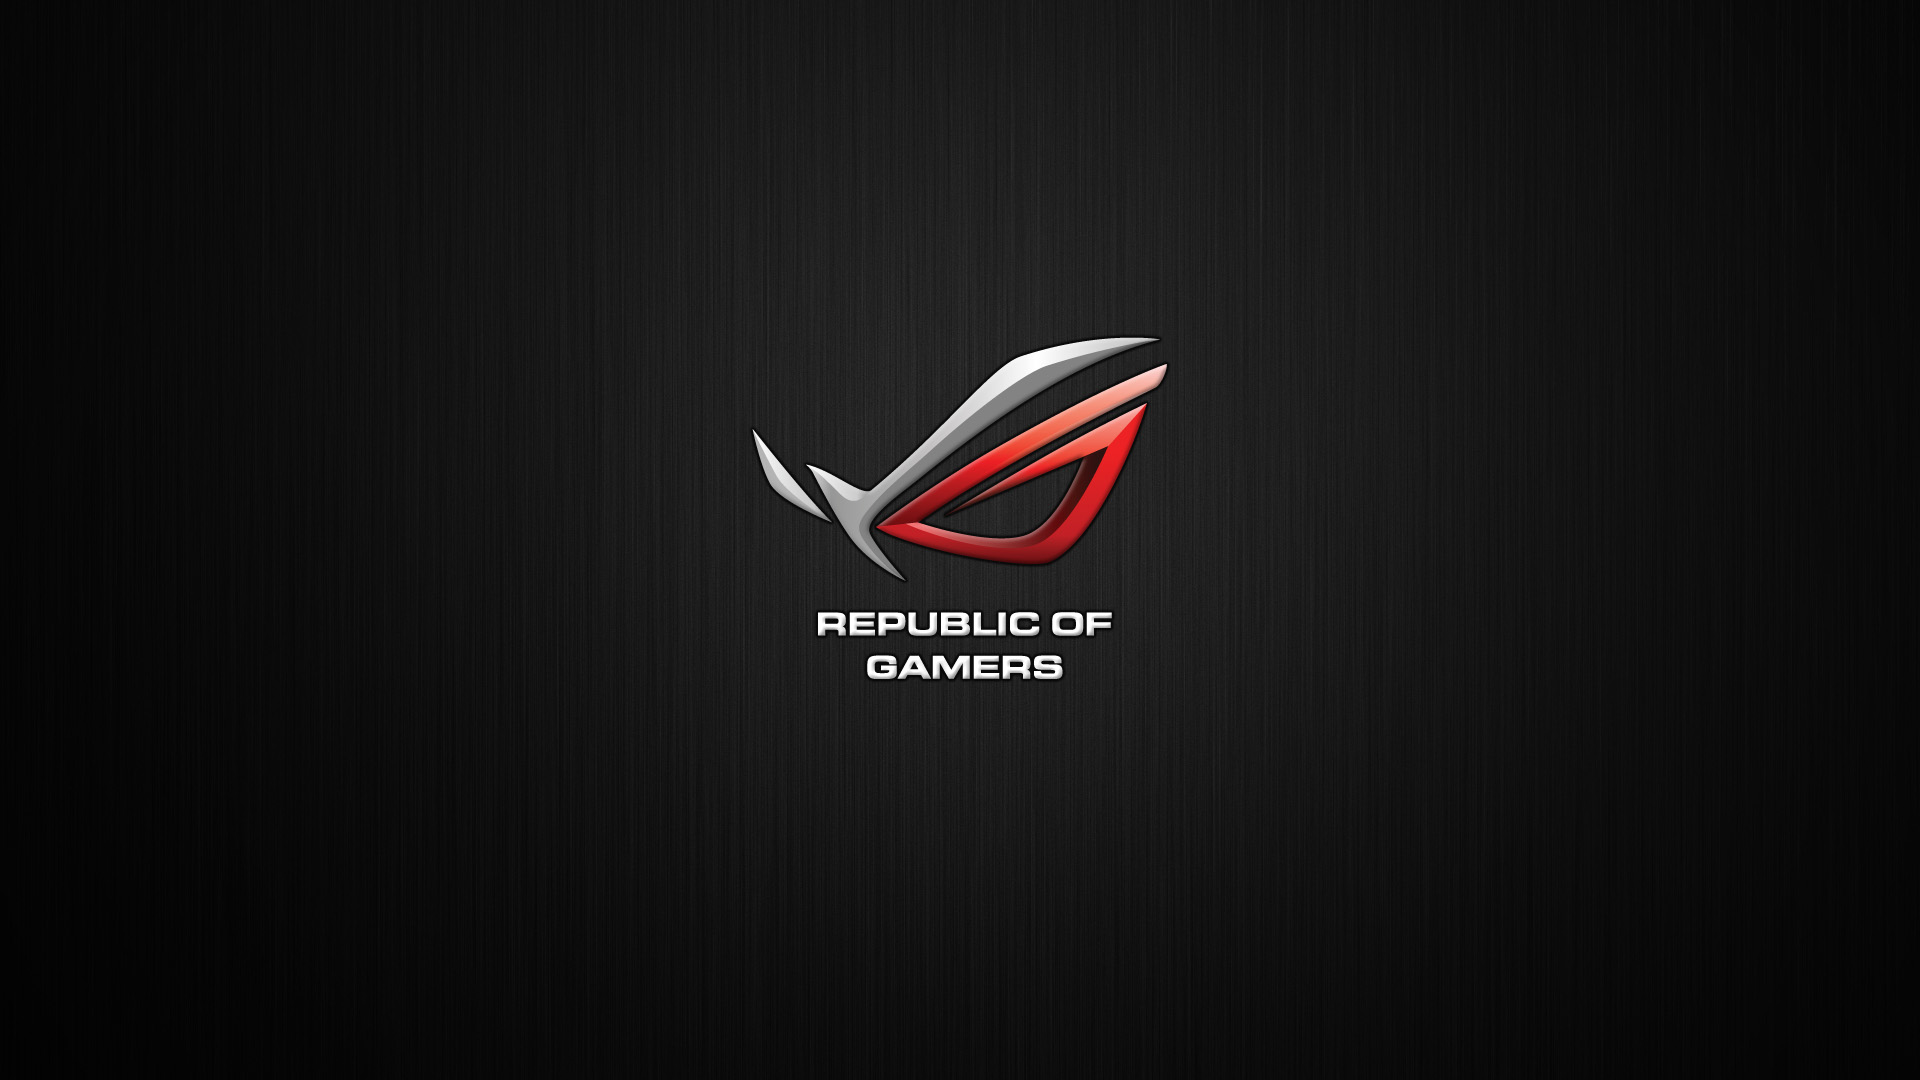 Wallpaper Petition Vote For Your Favorite Republic Of Gamers